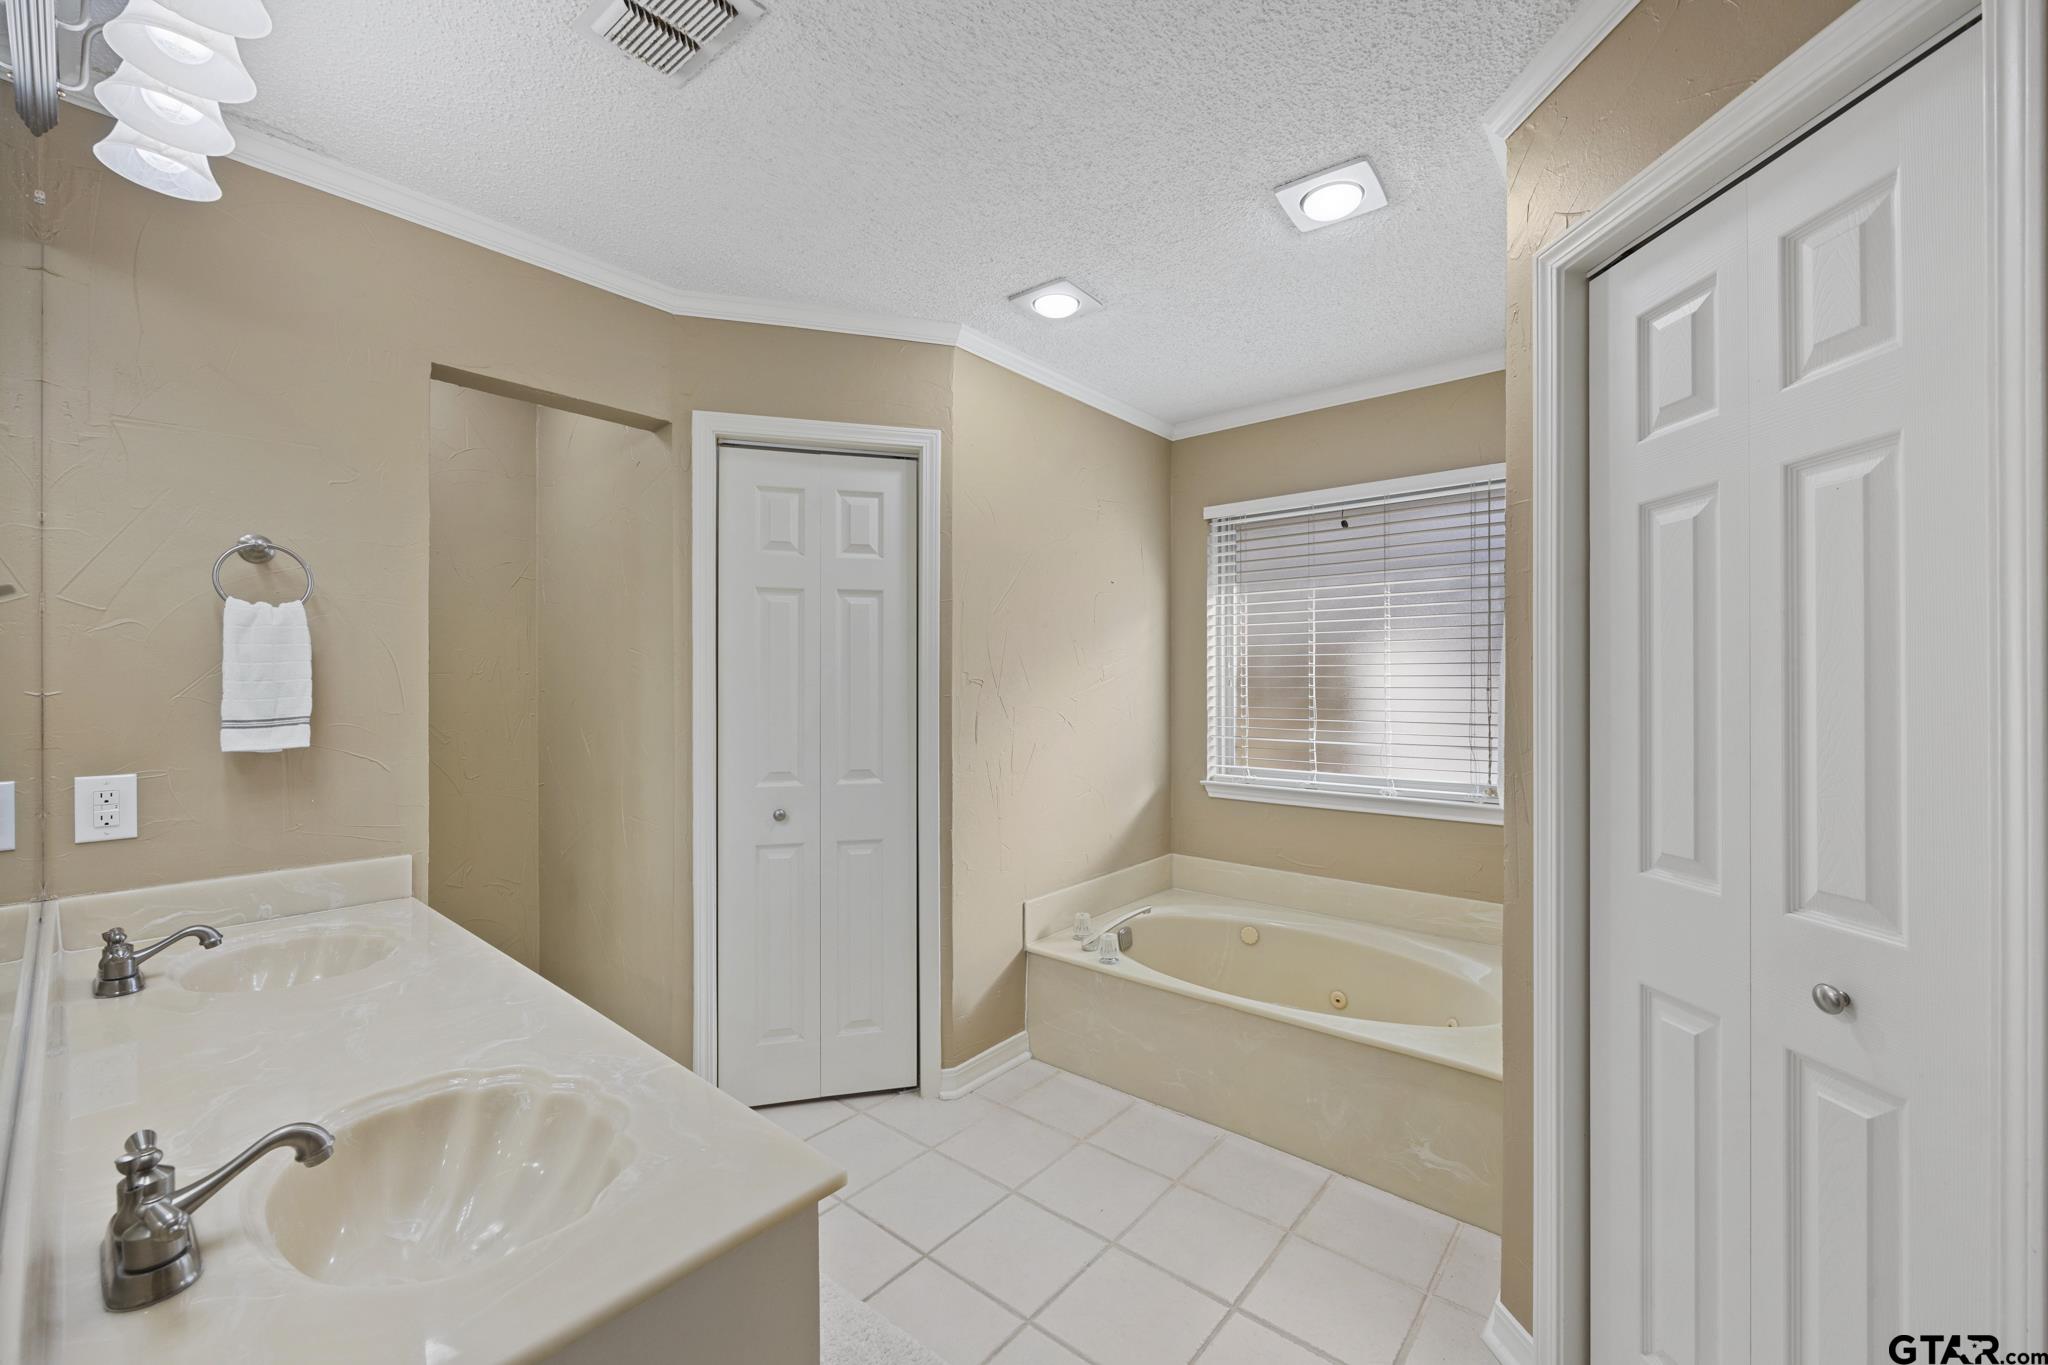 2 closets, jetted tub, separate walk-in shower, double vanity